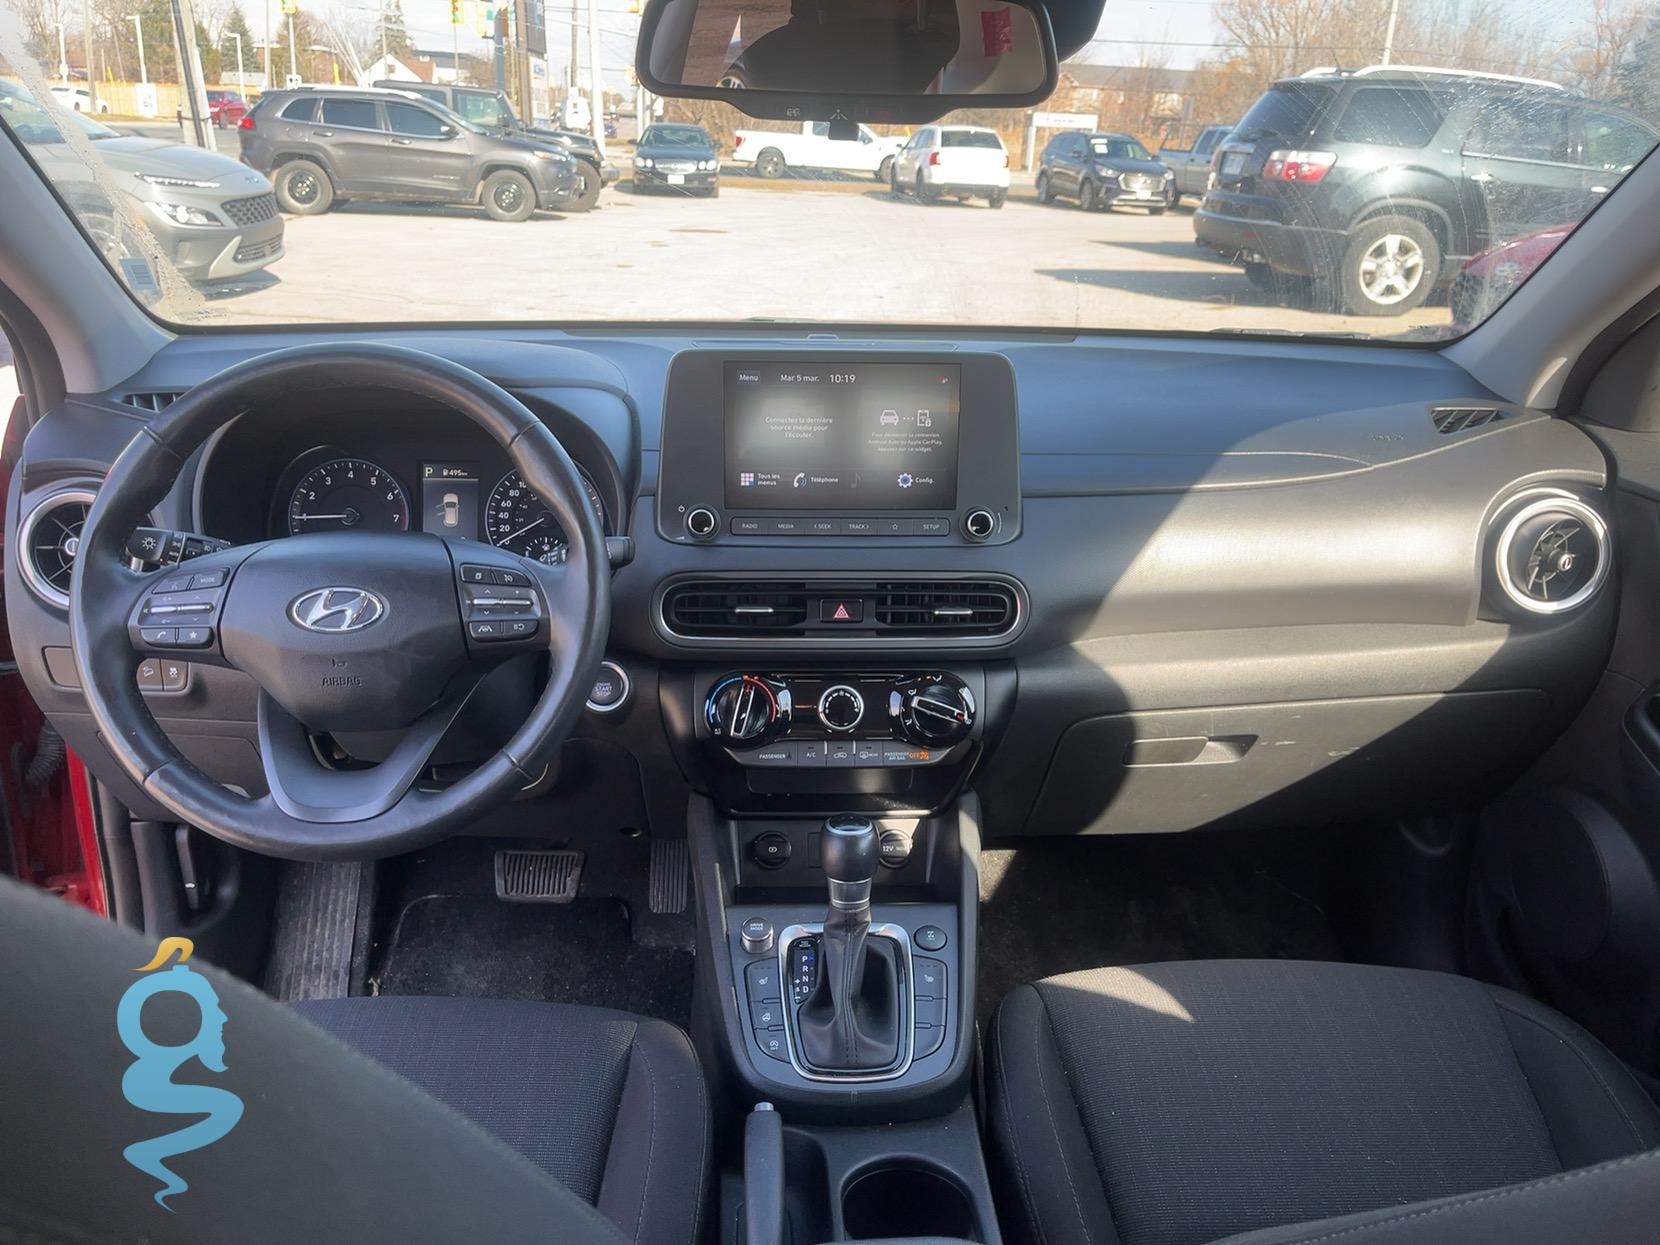 Hyundai Kona 2.0 Without FCA, SEL + Convenience Pkg (without FCA), SE SEL Wagon Body Style